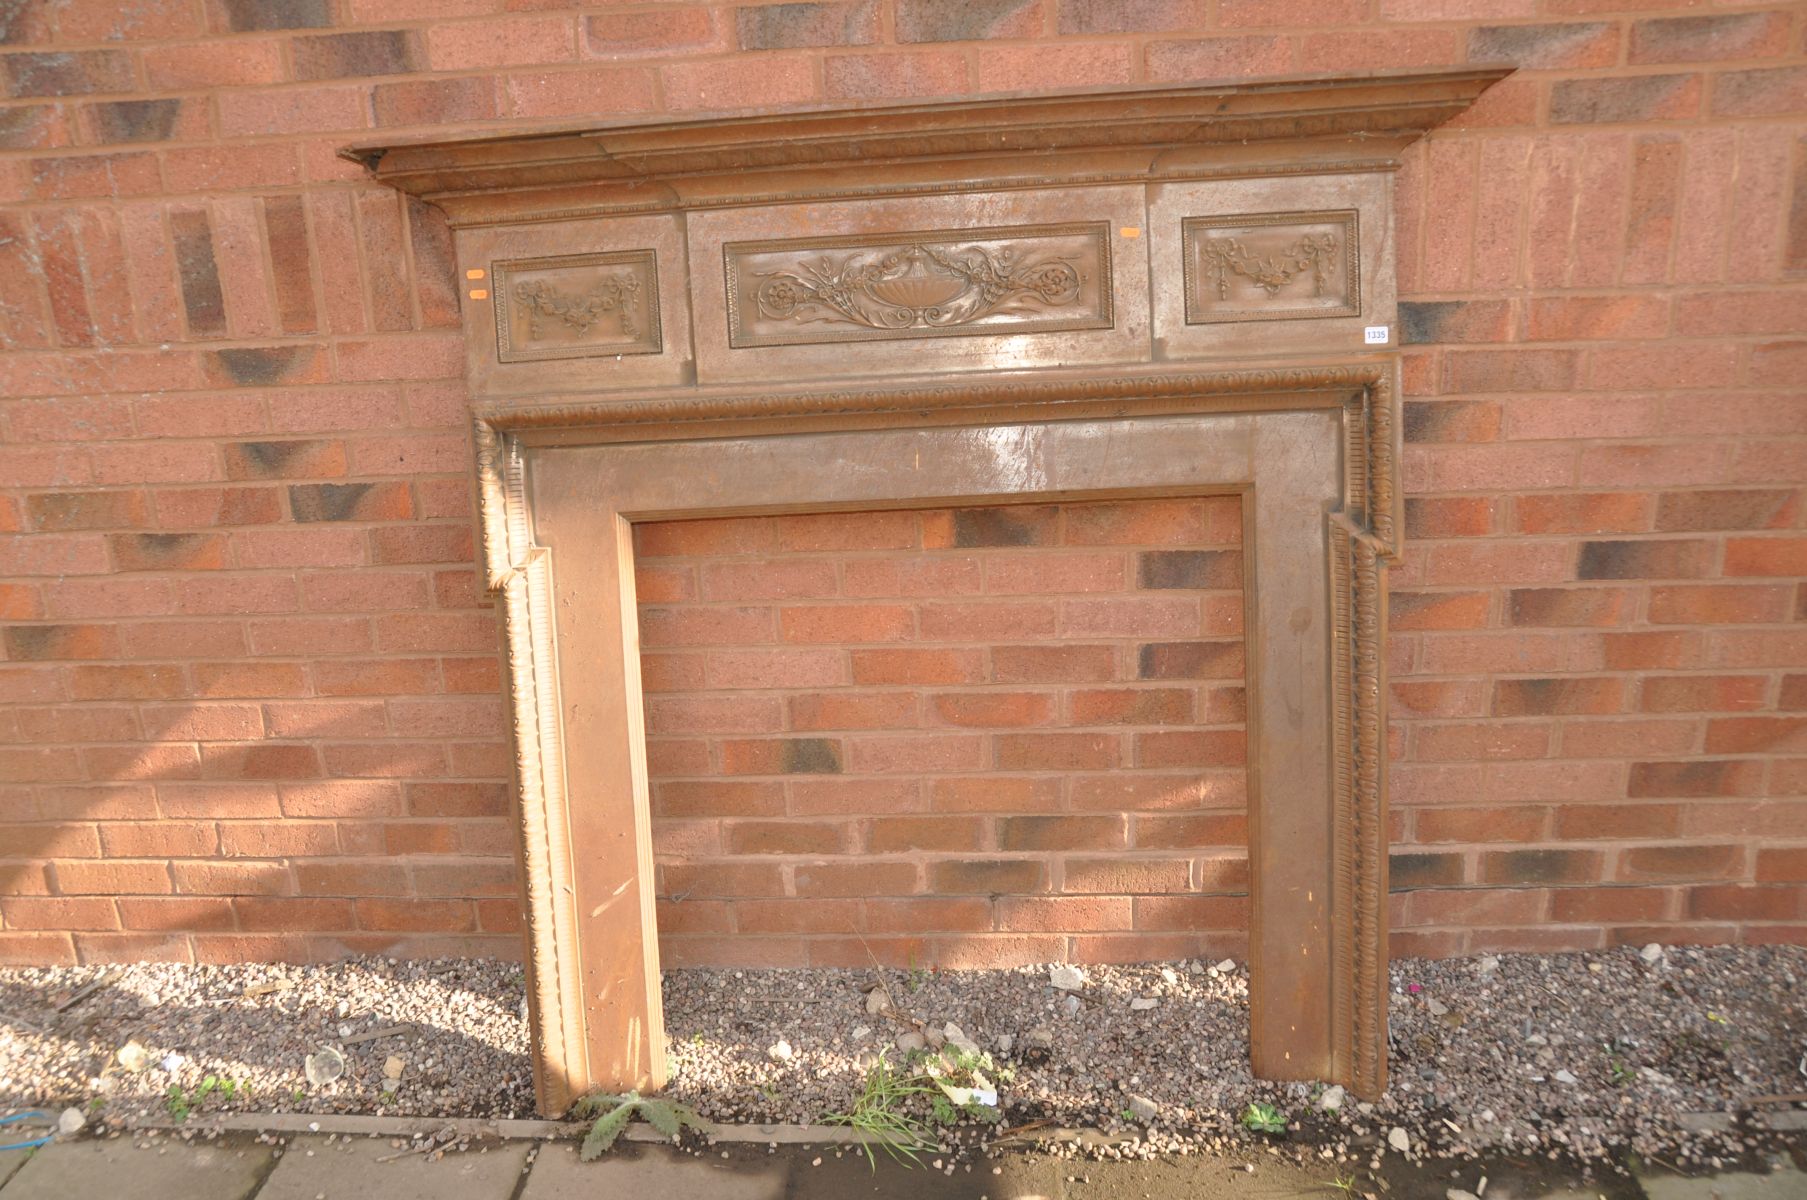 AN EDWARDIAN CAST IRON FIRE SURROUND with rope and swag with foliate detail lozenges to top